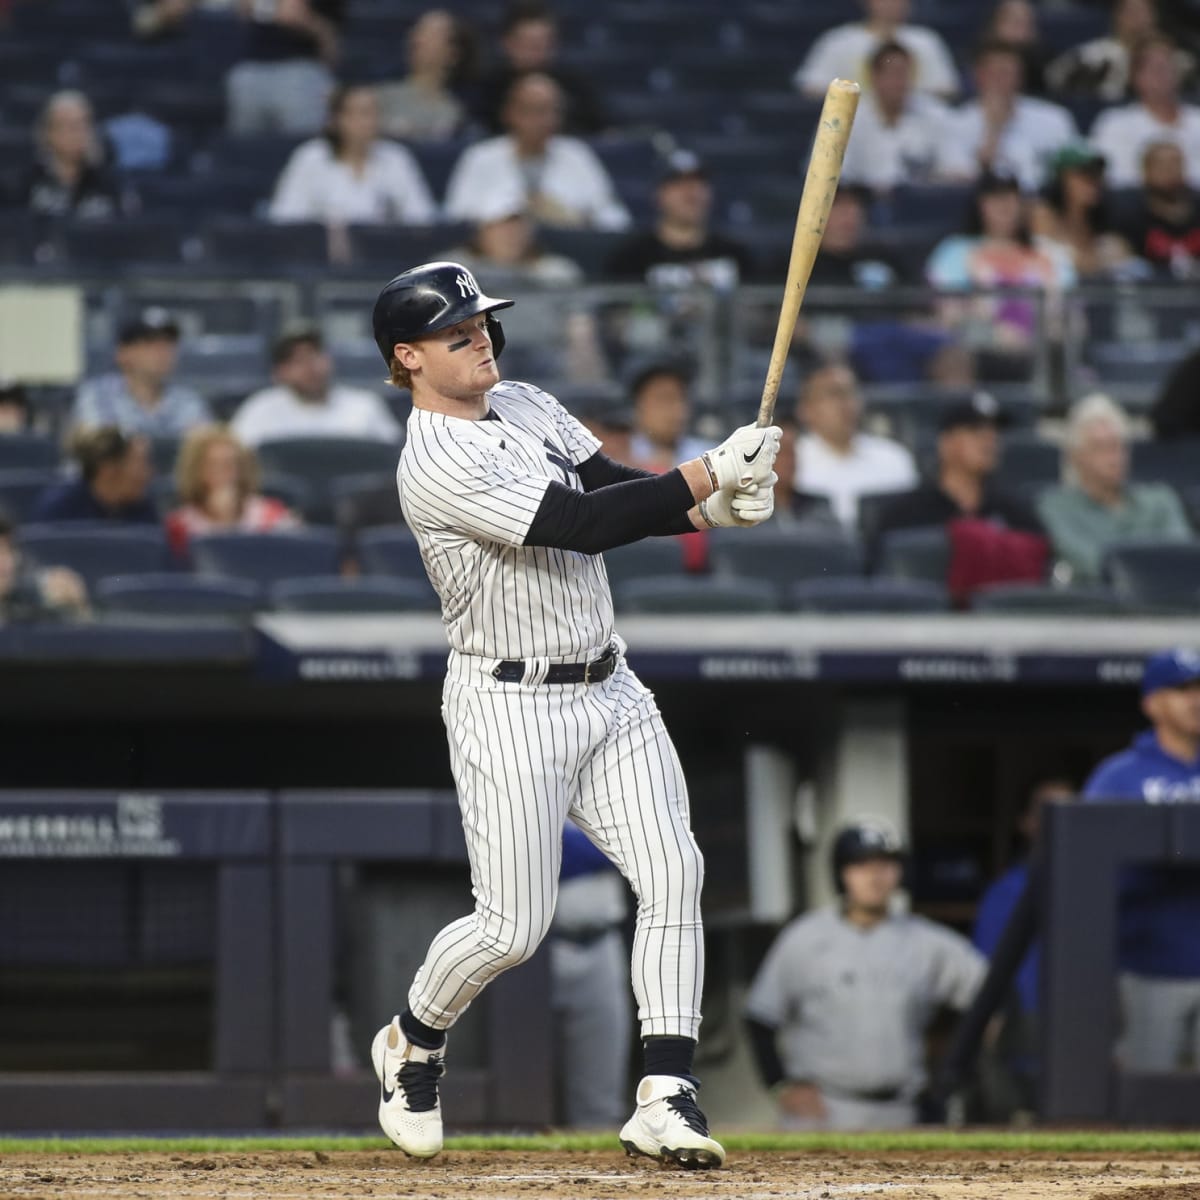 Hysteria over Clint Frazier No. 7 story shows that Yankees and